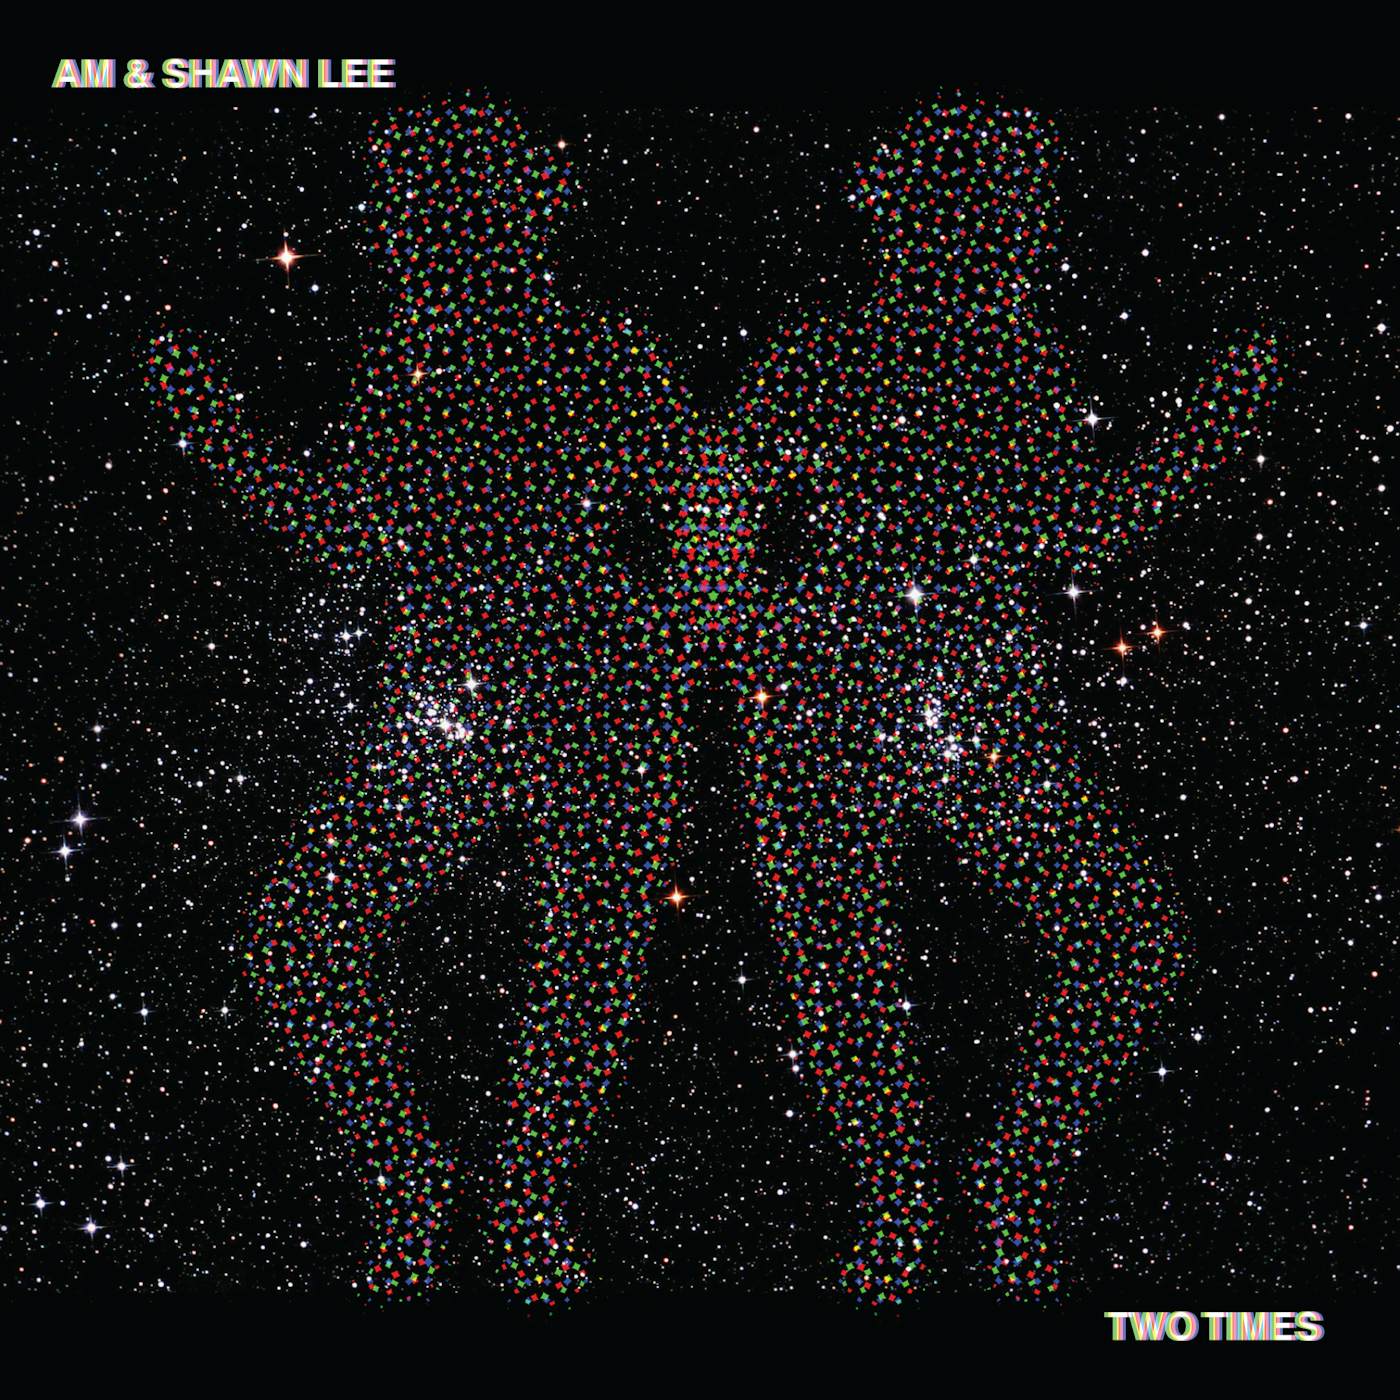 AM & Shawn Lee TWO TIMES Vinyl Record